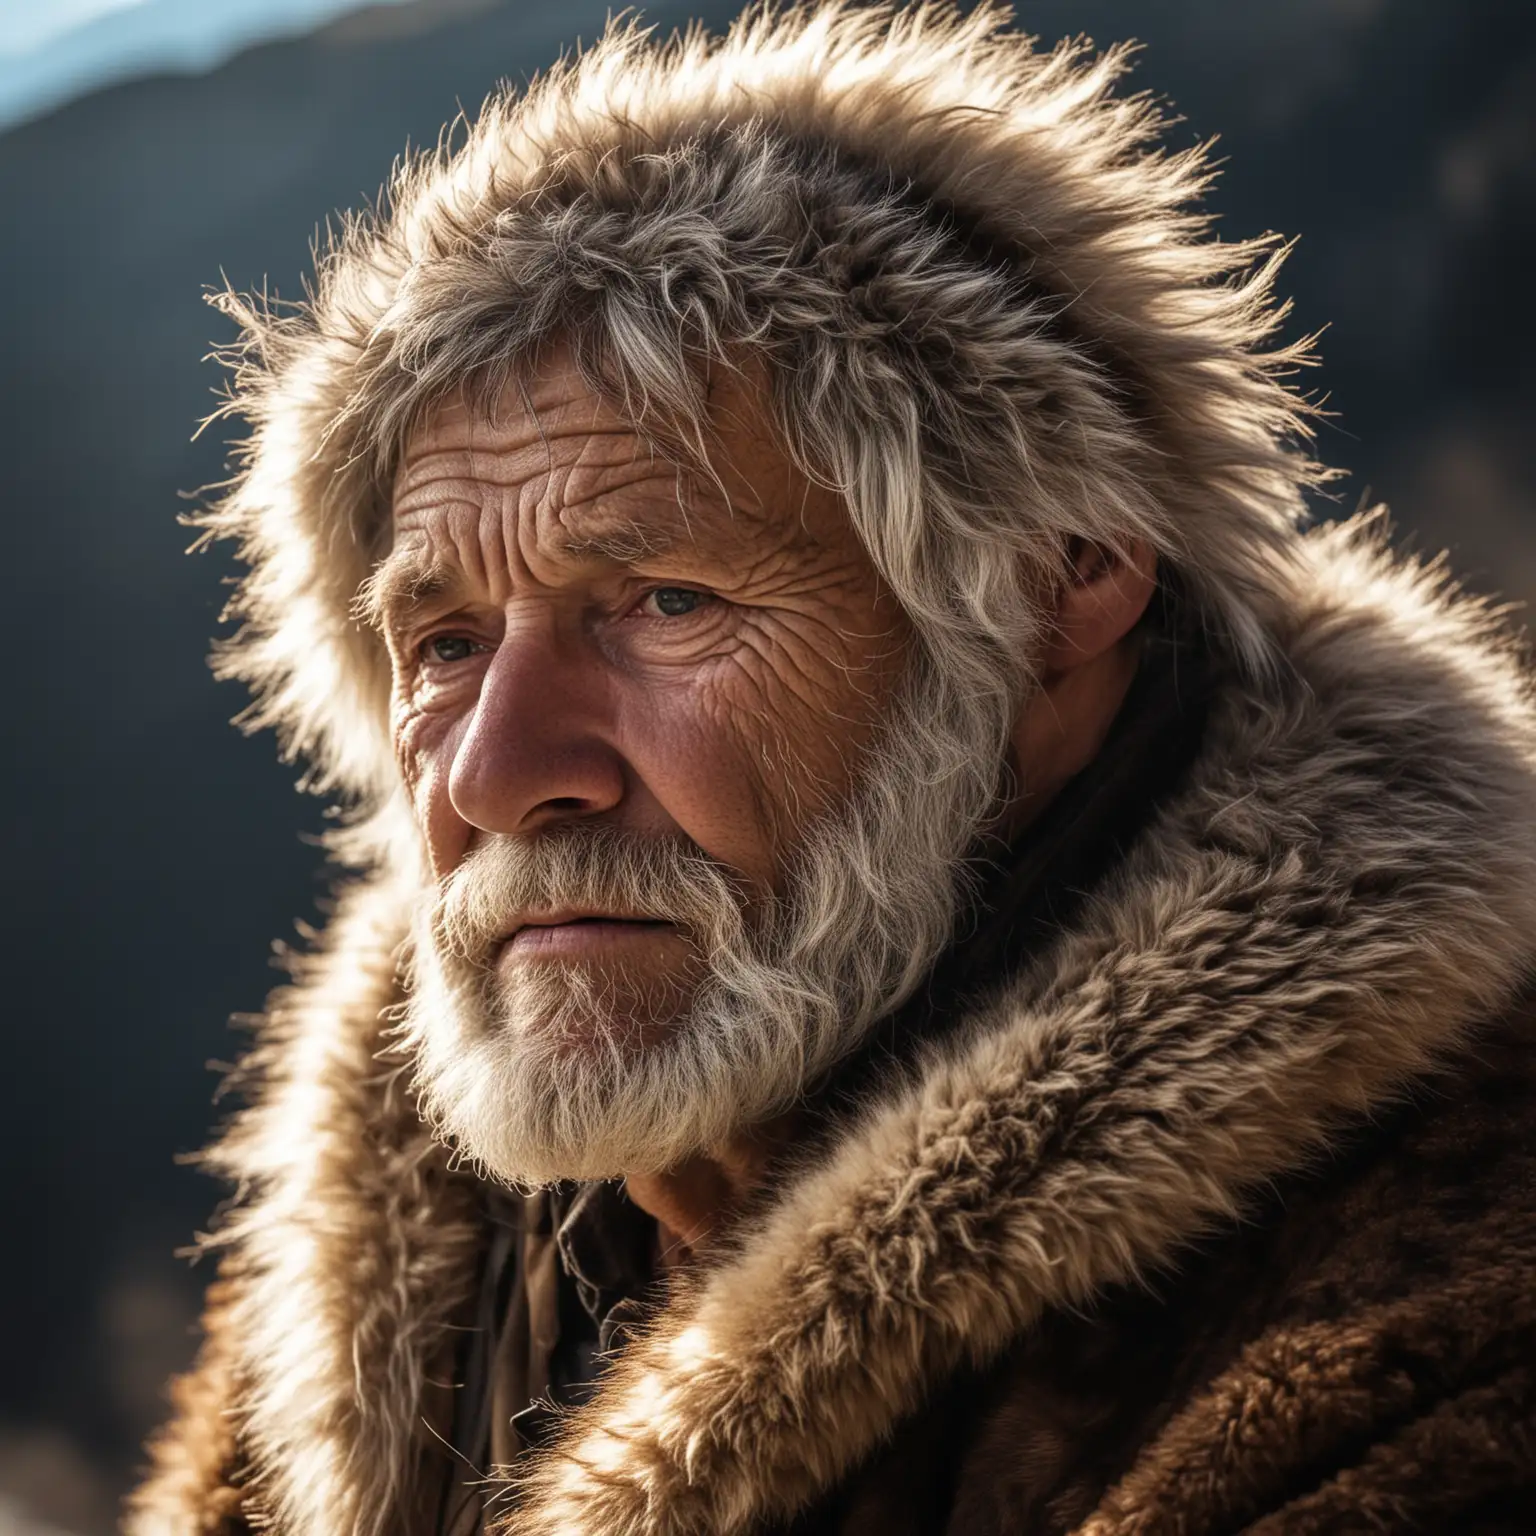 Portrait of Old Mountain Man in Fur Looking into the Distance